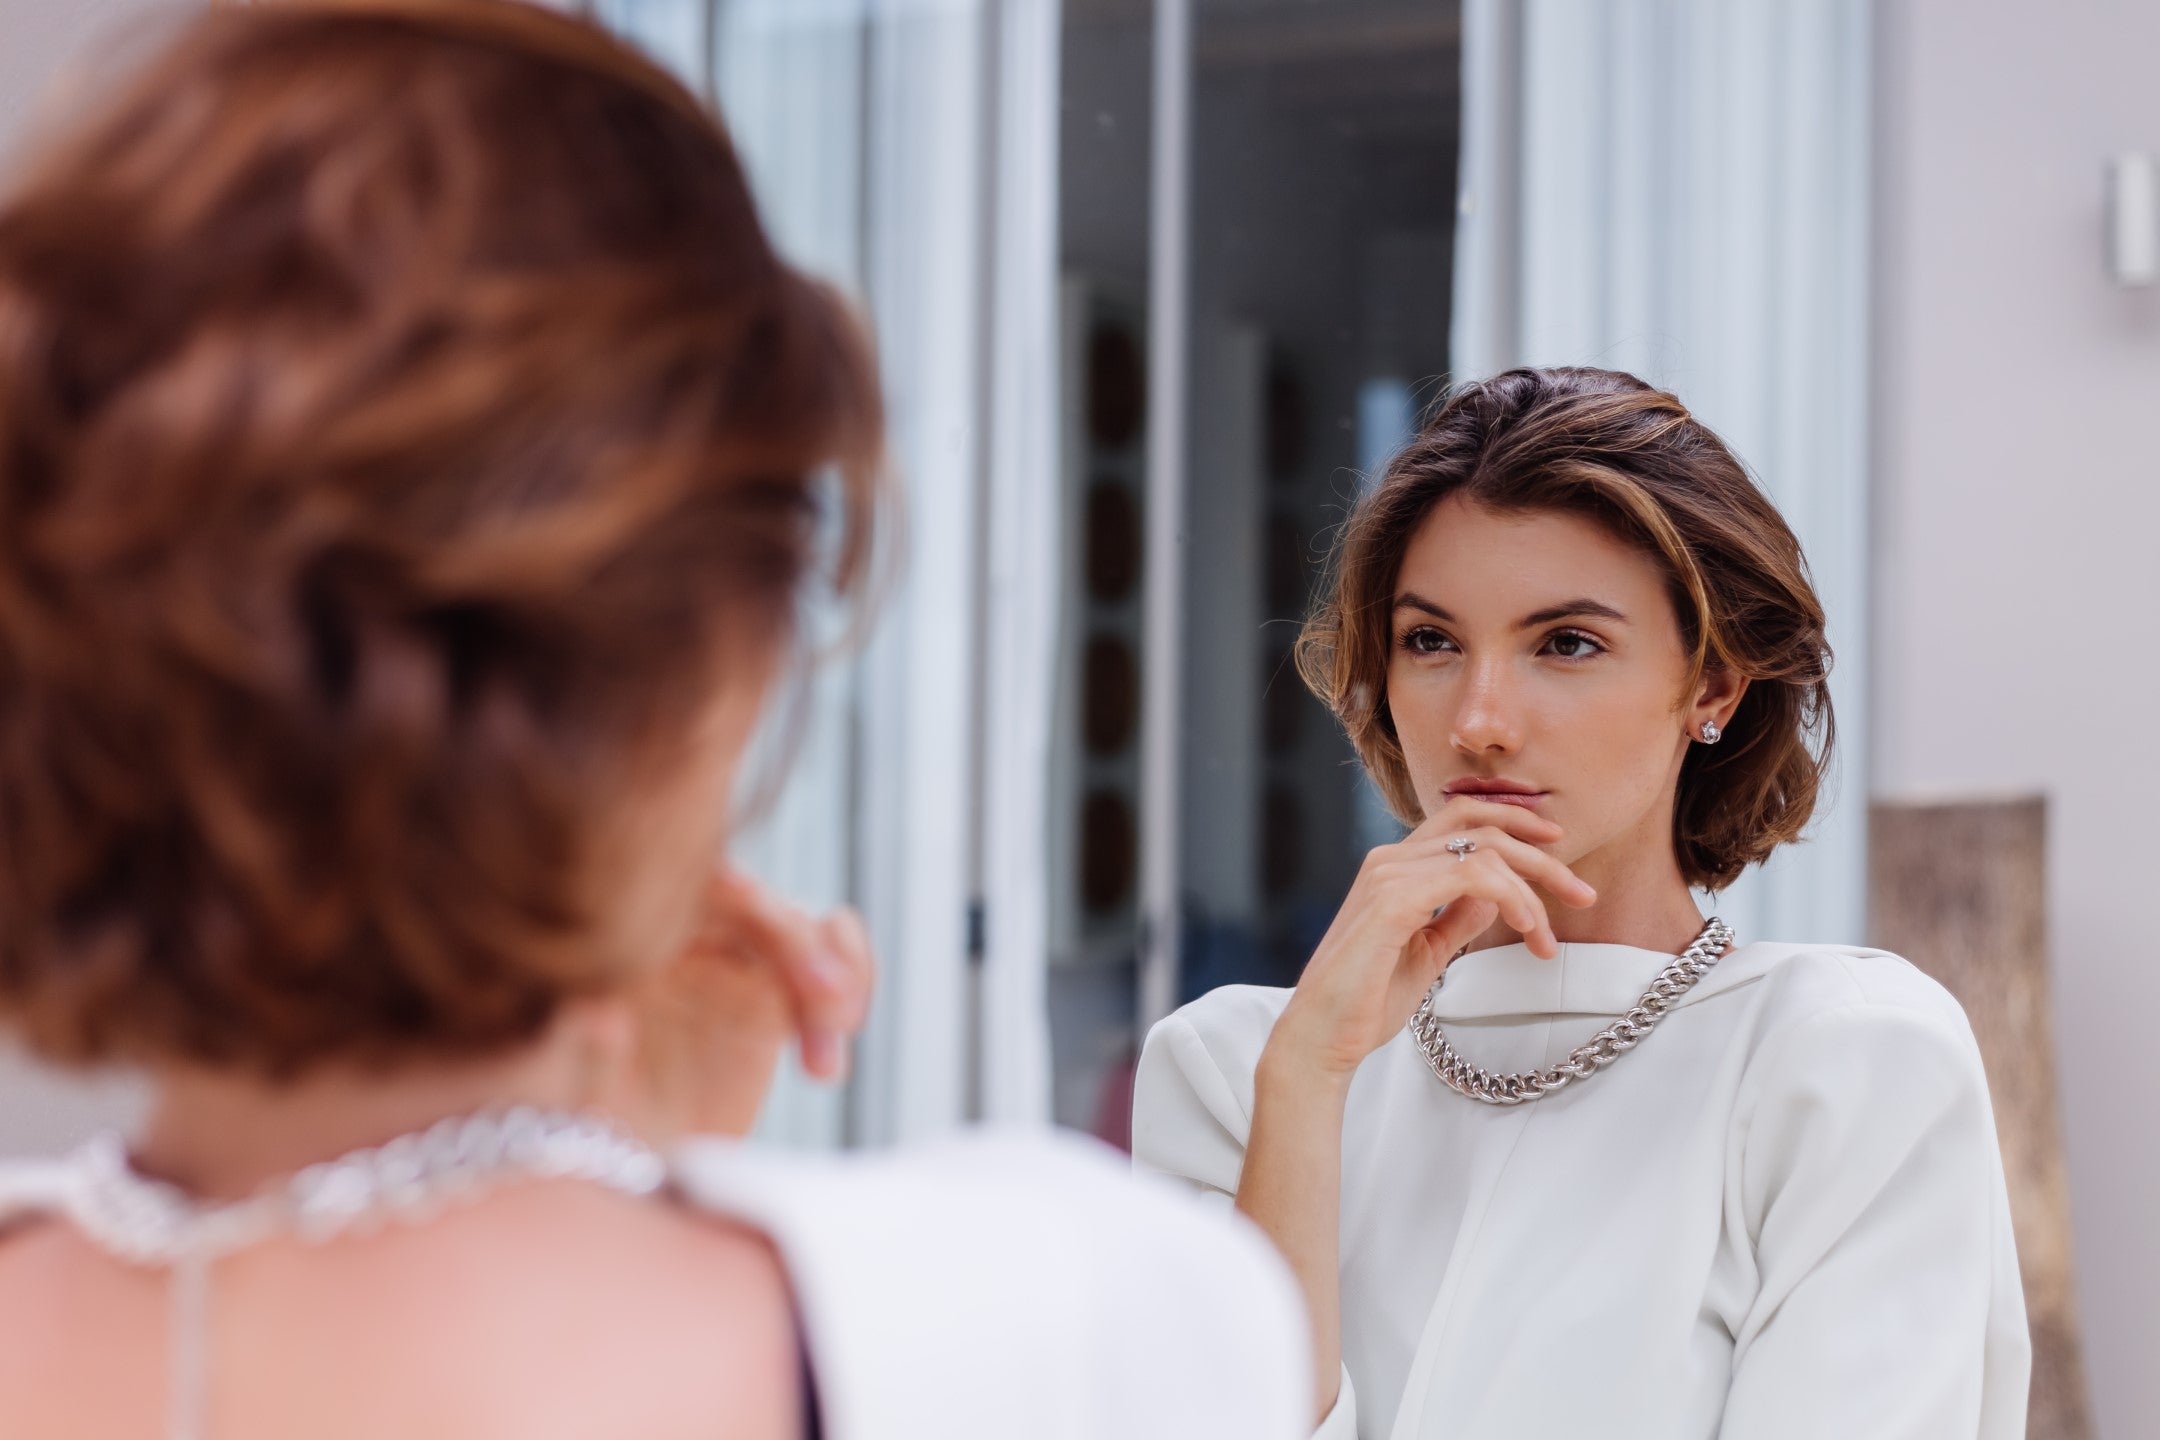 Woman in white blazer contemplating how to stop facial hair growth naturally while looking in mirror at luxury villa.